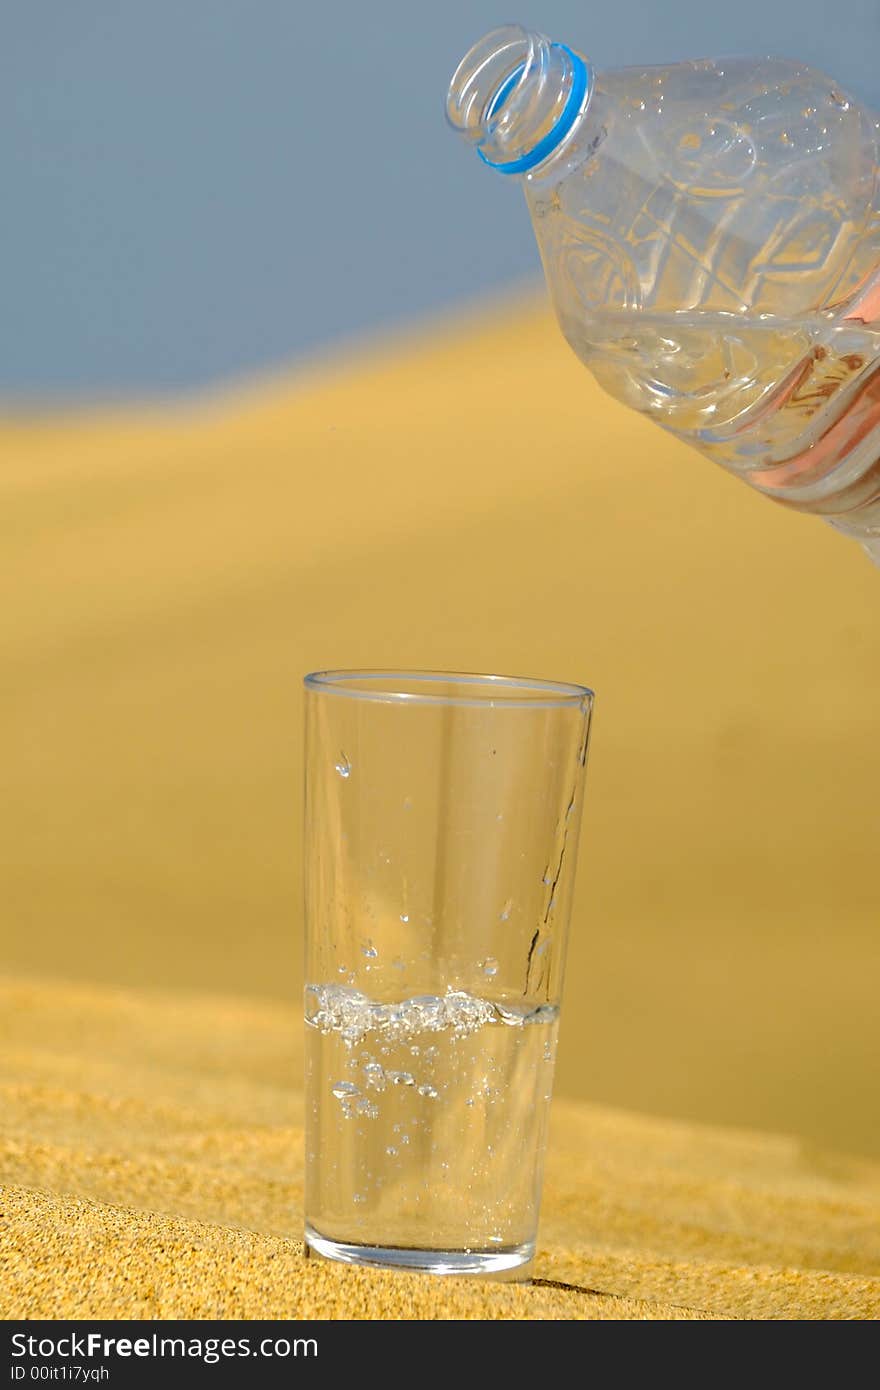 A glass of fresh water and bottle in a desert. Note that the water and bubbles are in motion blur. A glass of fresh water and bottle in a desert. Note that the water and bubbles are in motion blur.